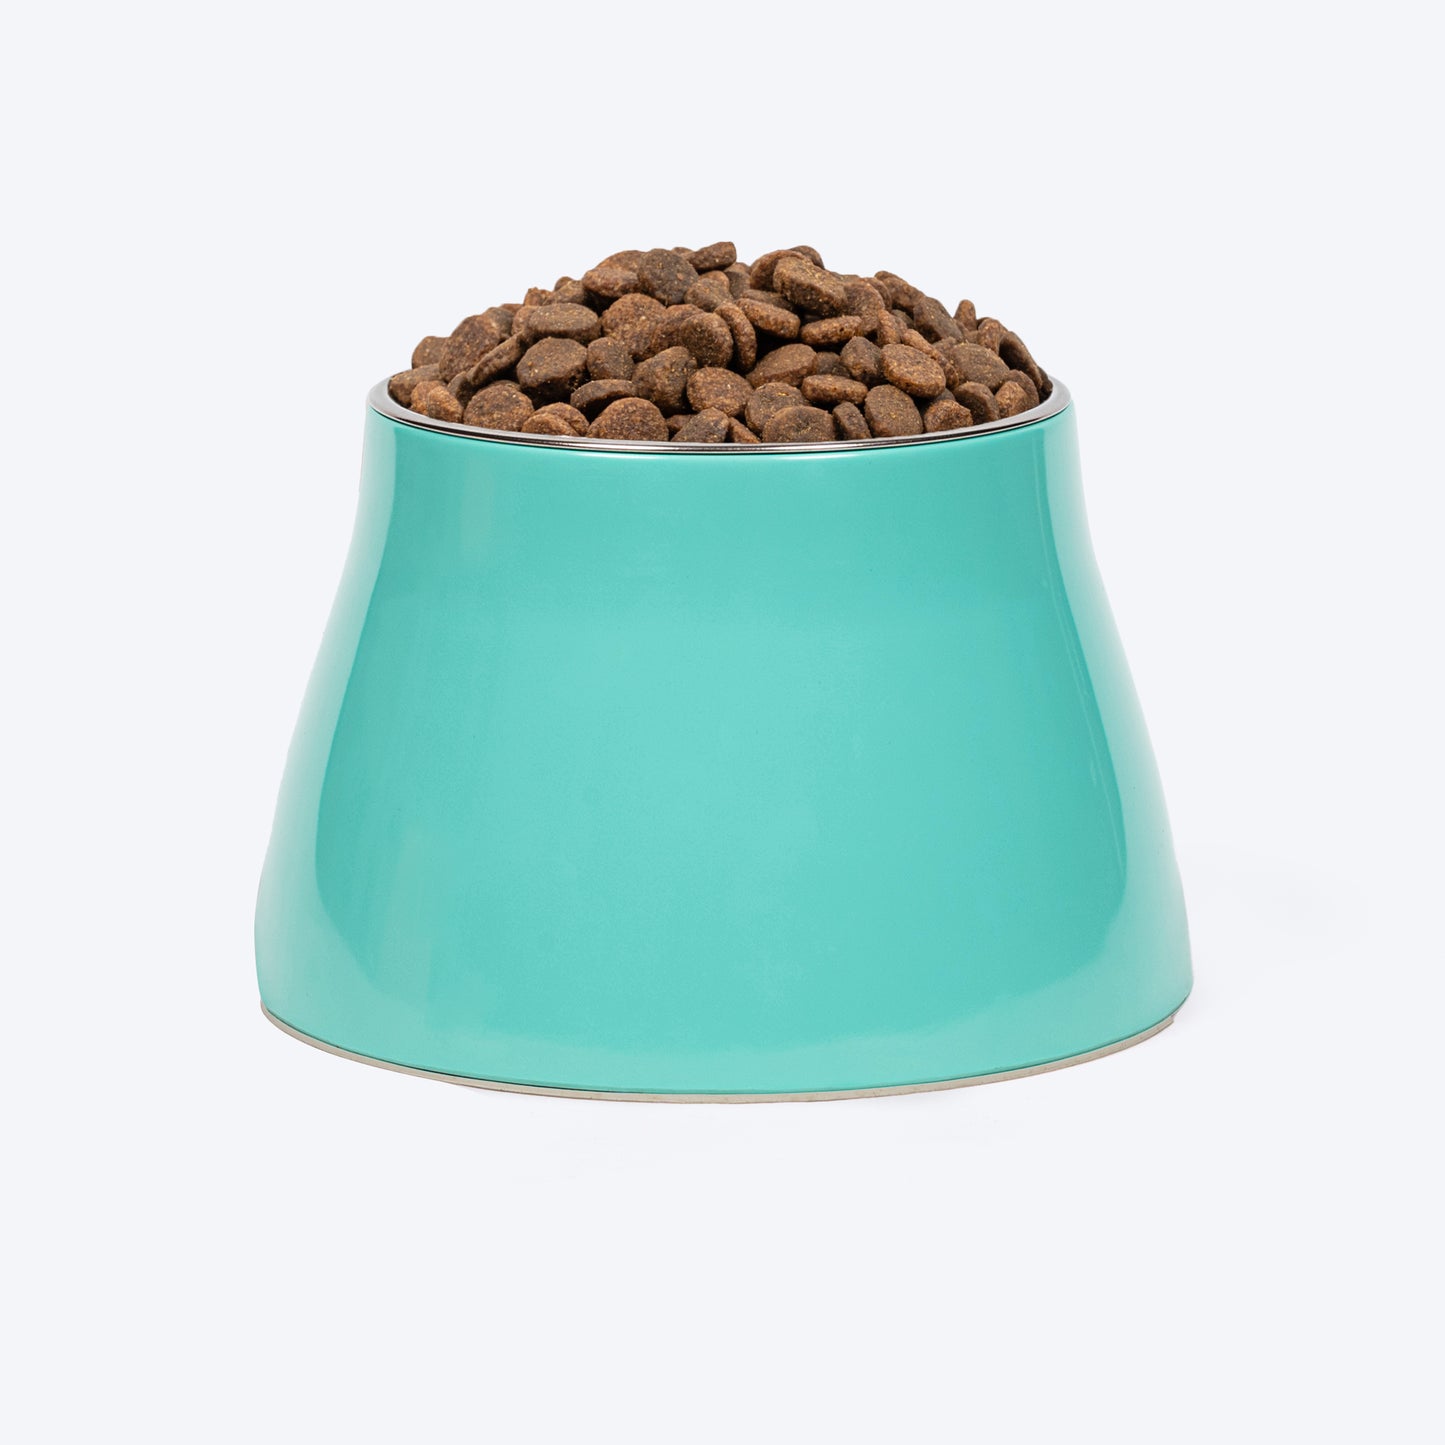 HUFT Elevated Bowl For Dogs & Cats - Aqua - Heads Up For Tails